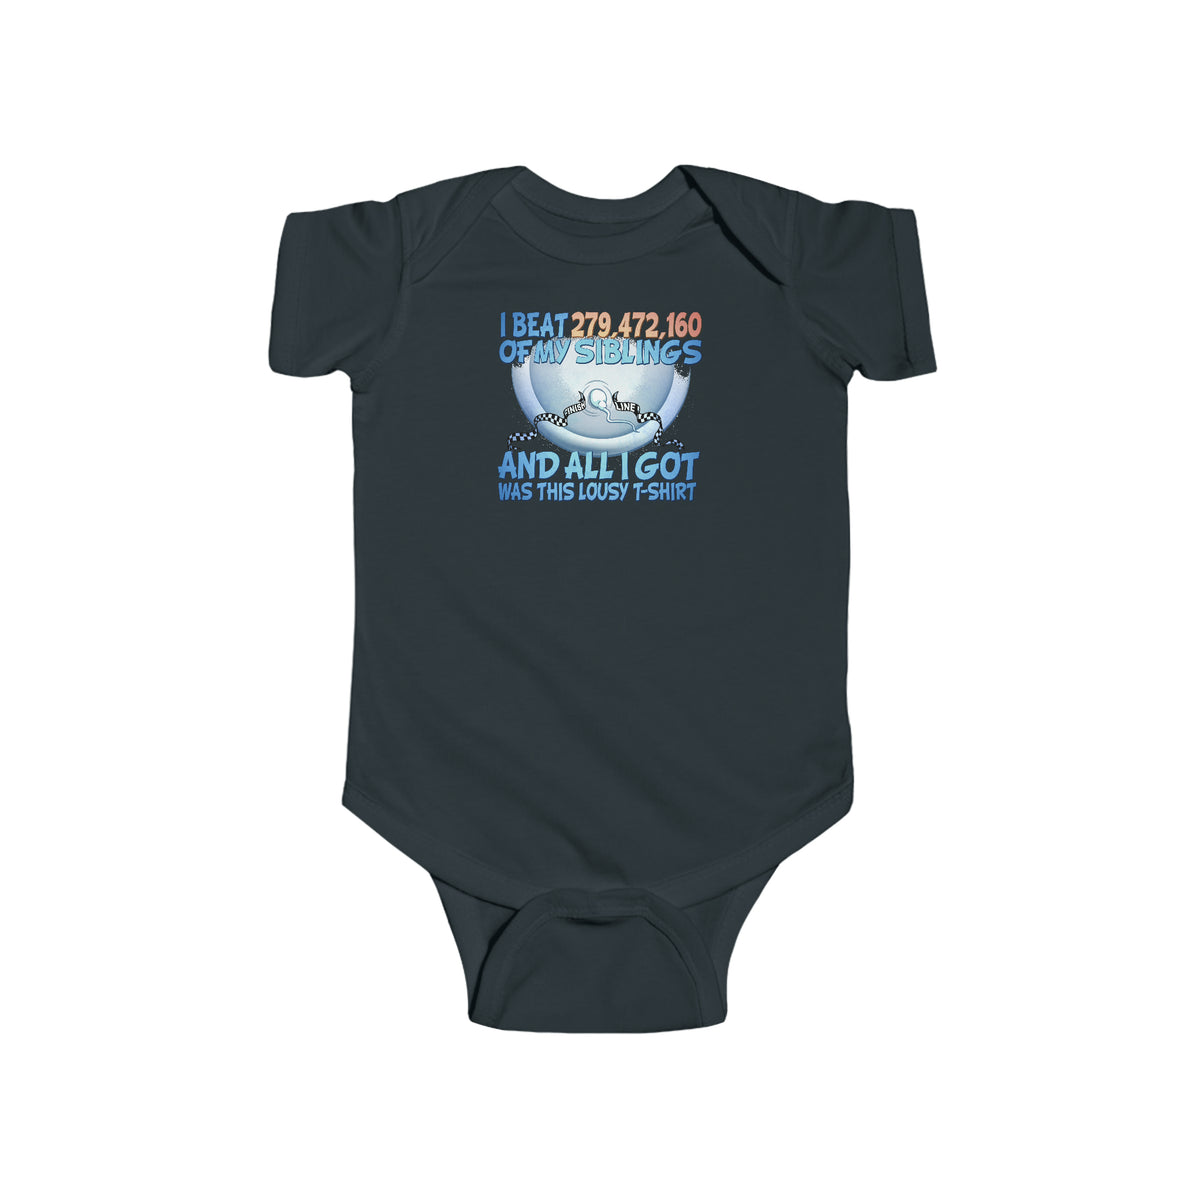 I Beat 279472160 Of My Siblings And All I Got Was This Lousy T-Shirt - Baby Onesie